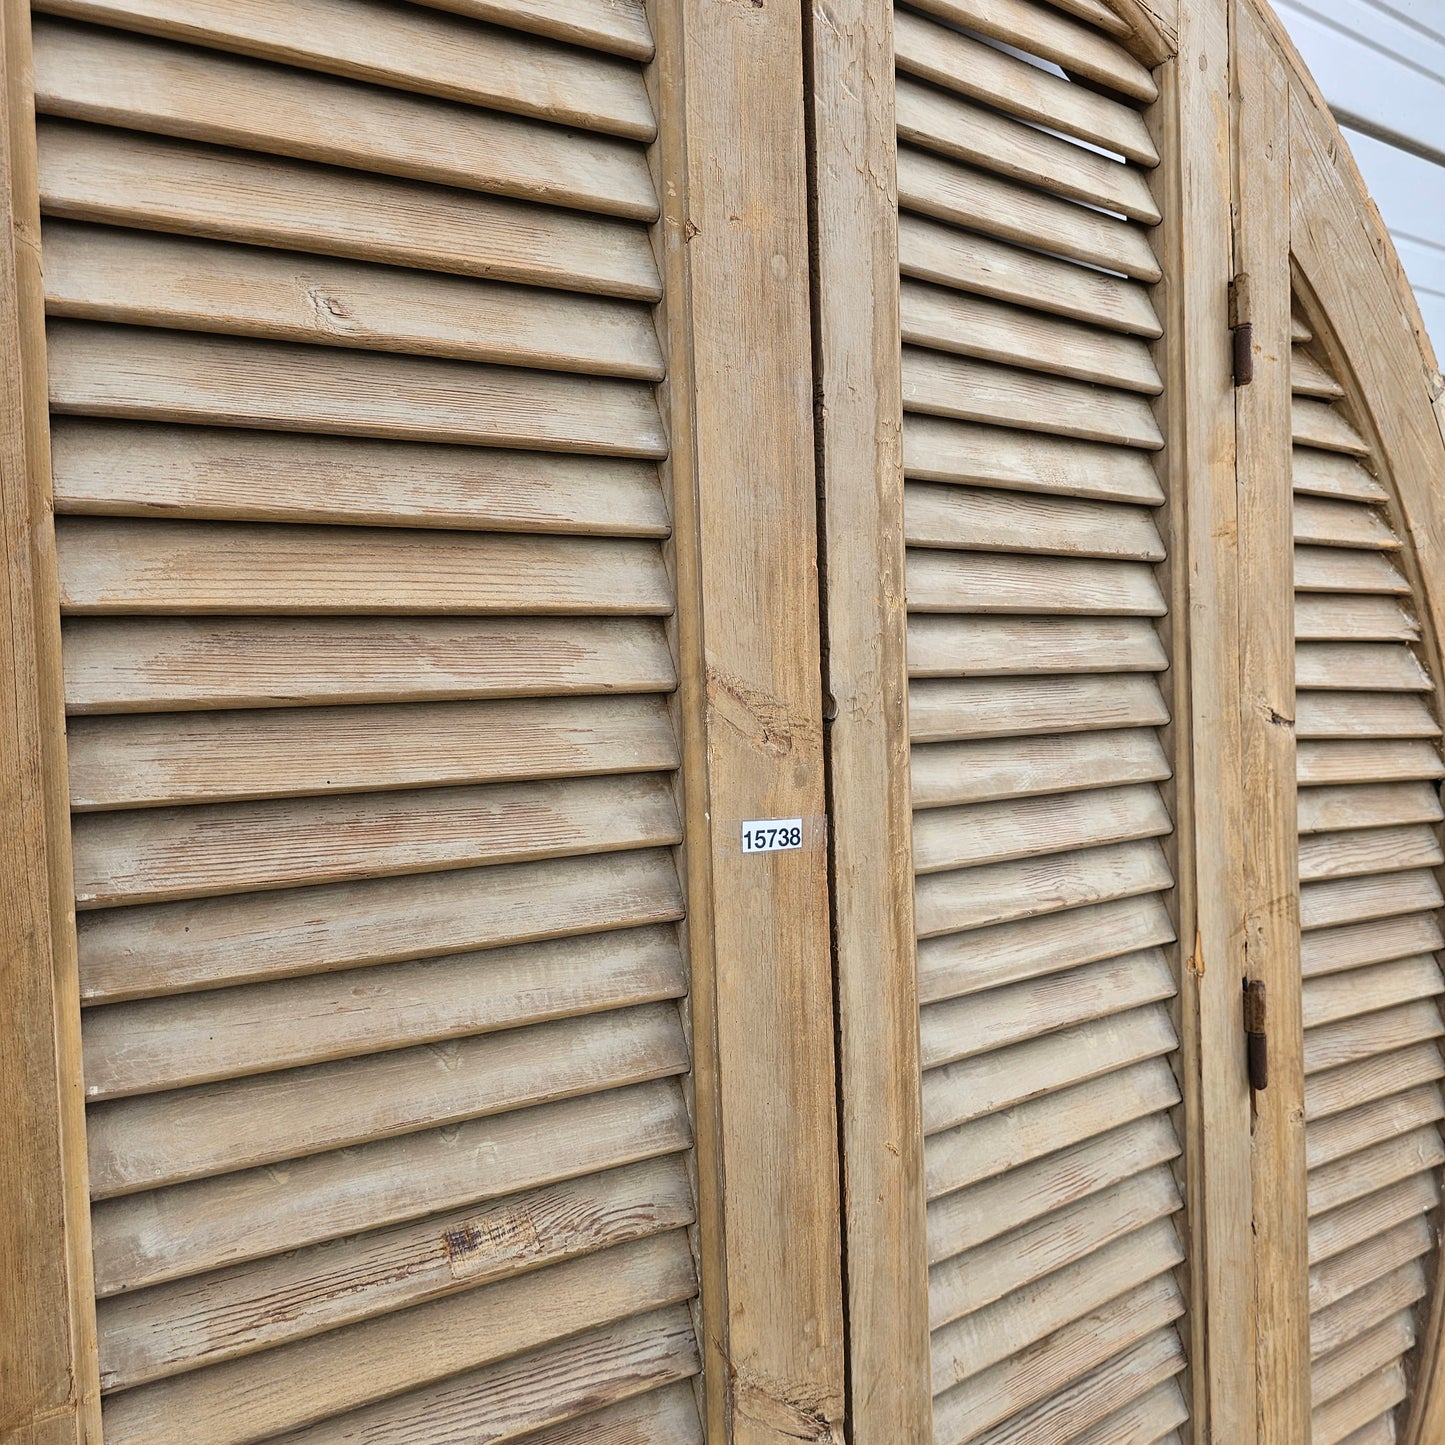 Set of 4 Round Wood Shutters